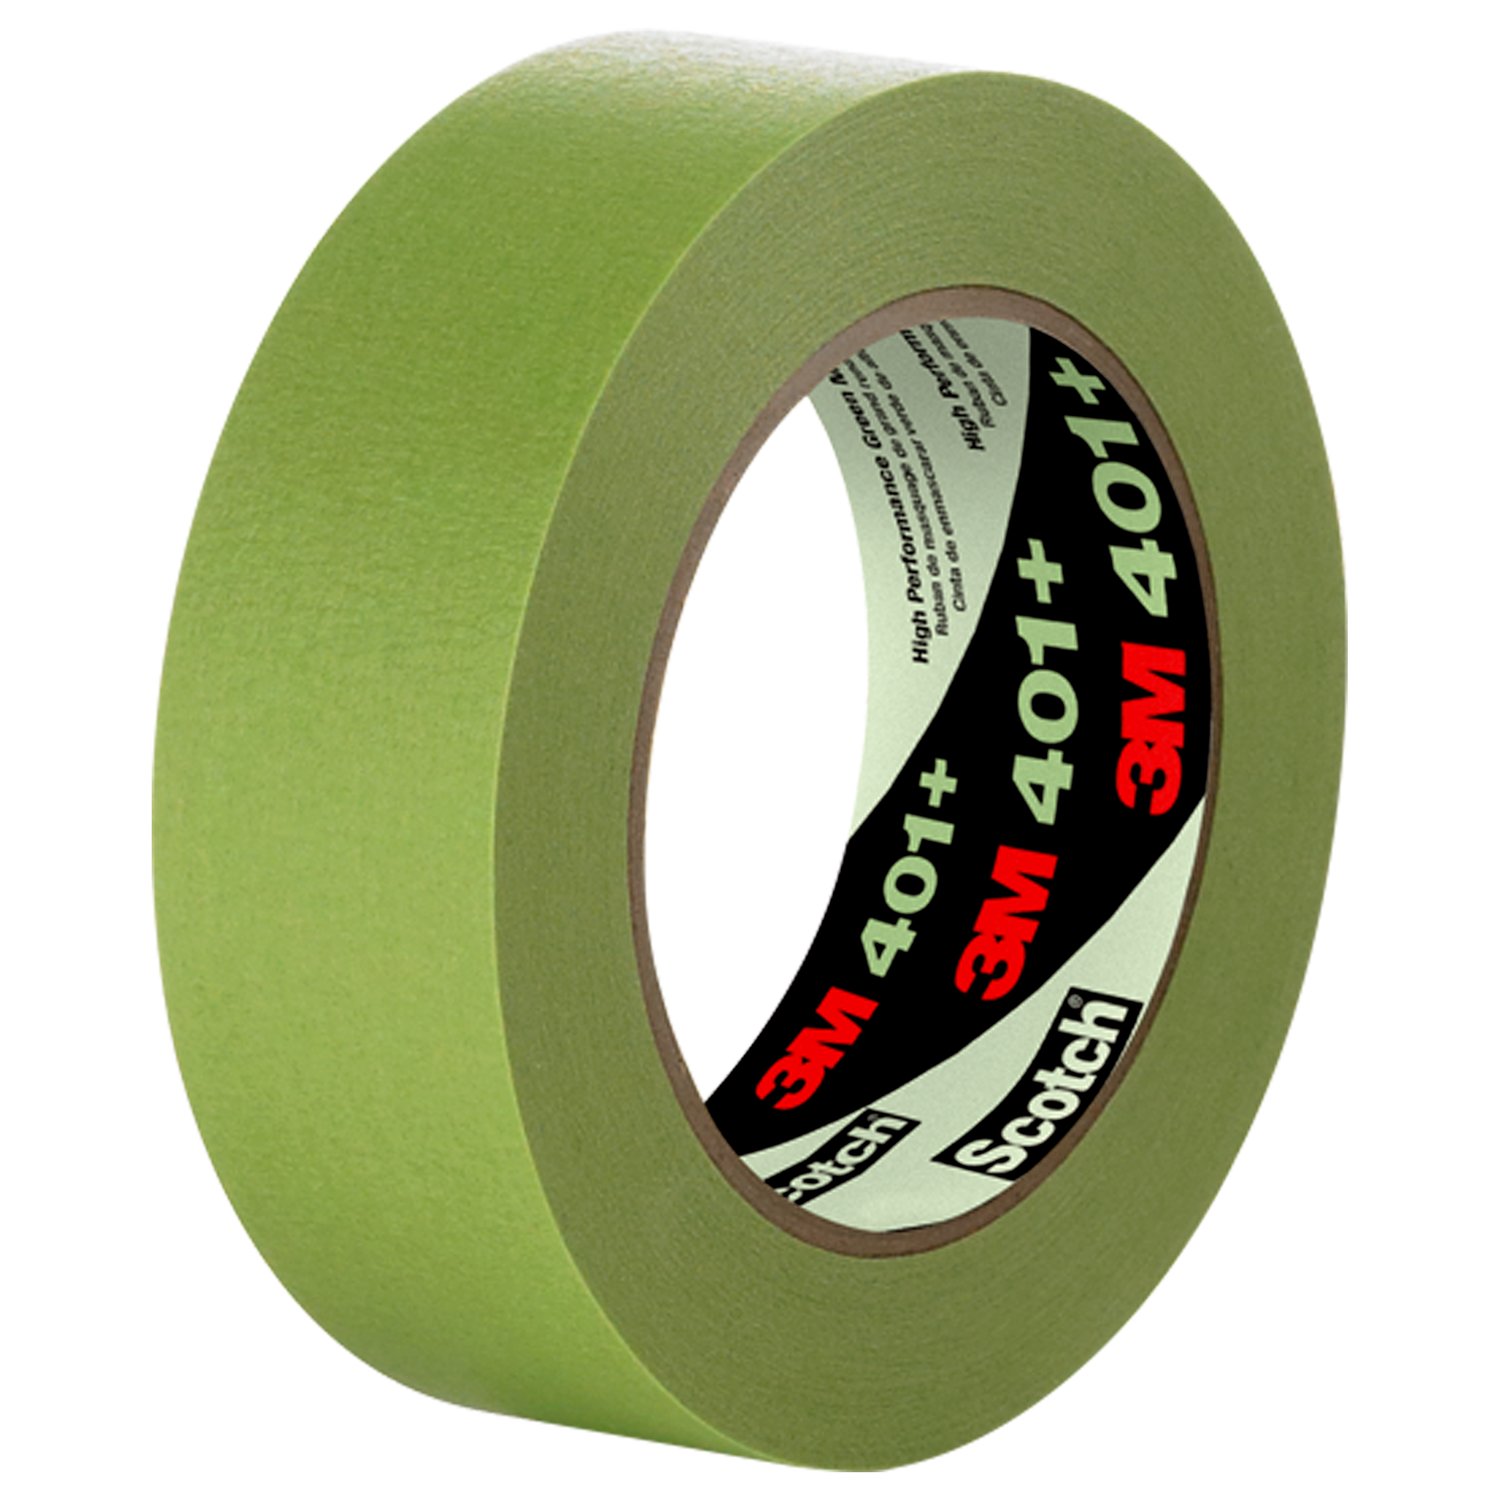 7000124901 - 3M High Performance Green Masking Tape 401+, 1490 mm x 55 m, 6.7 mil,
untrimmed, 1 Roll/Case